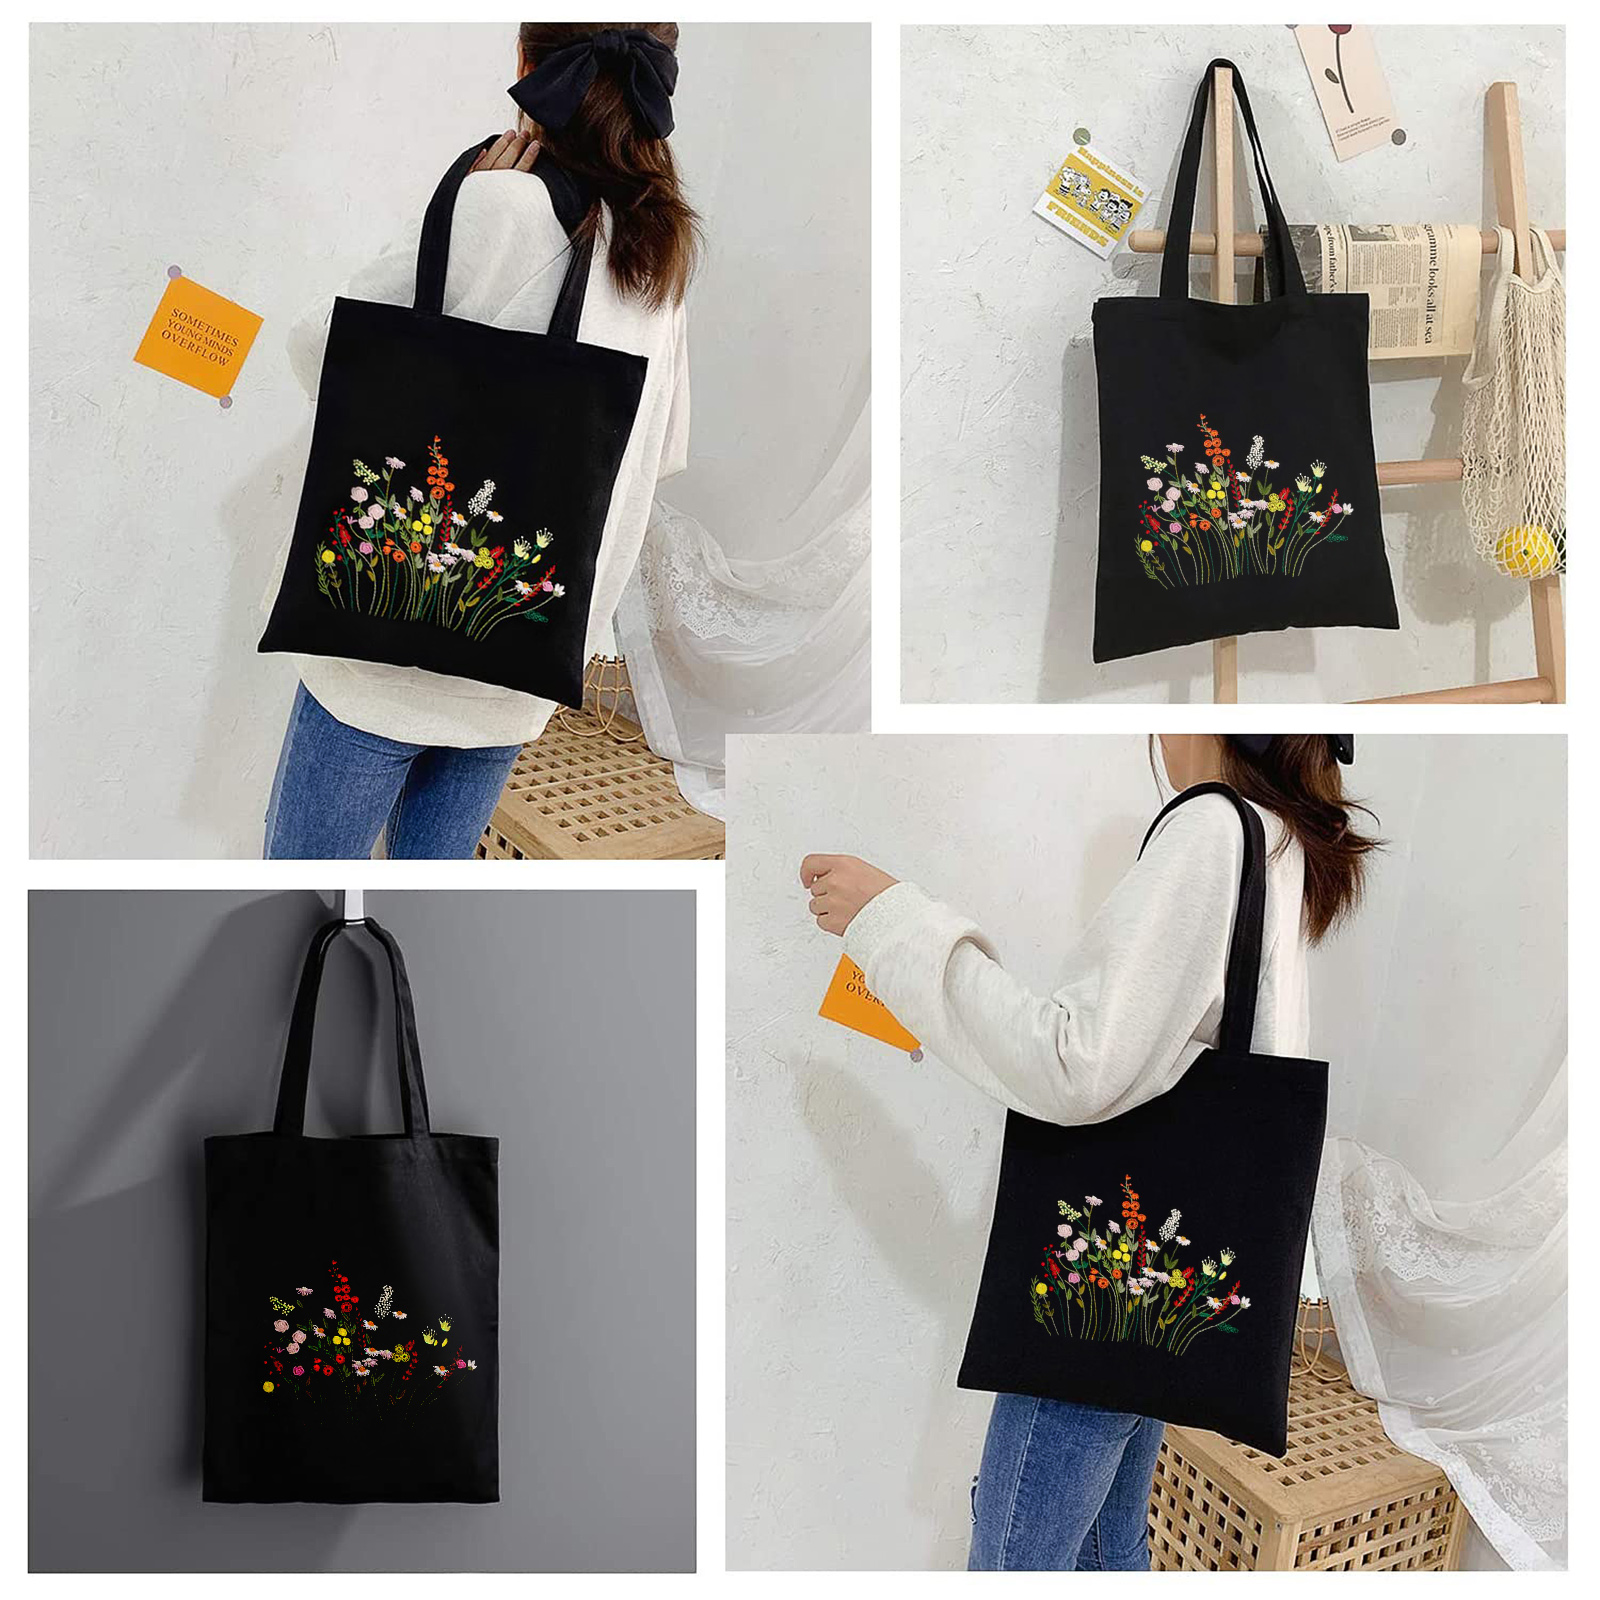 DSstyles Tote Bag Embroidery Kit with Pattern and Instructions